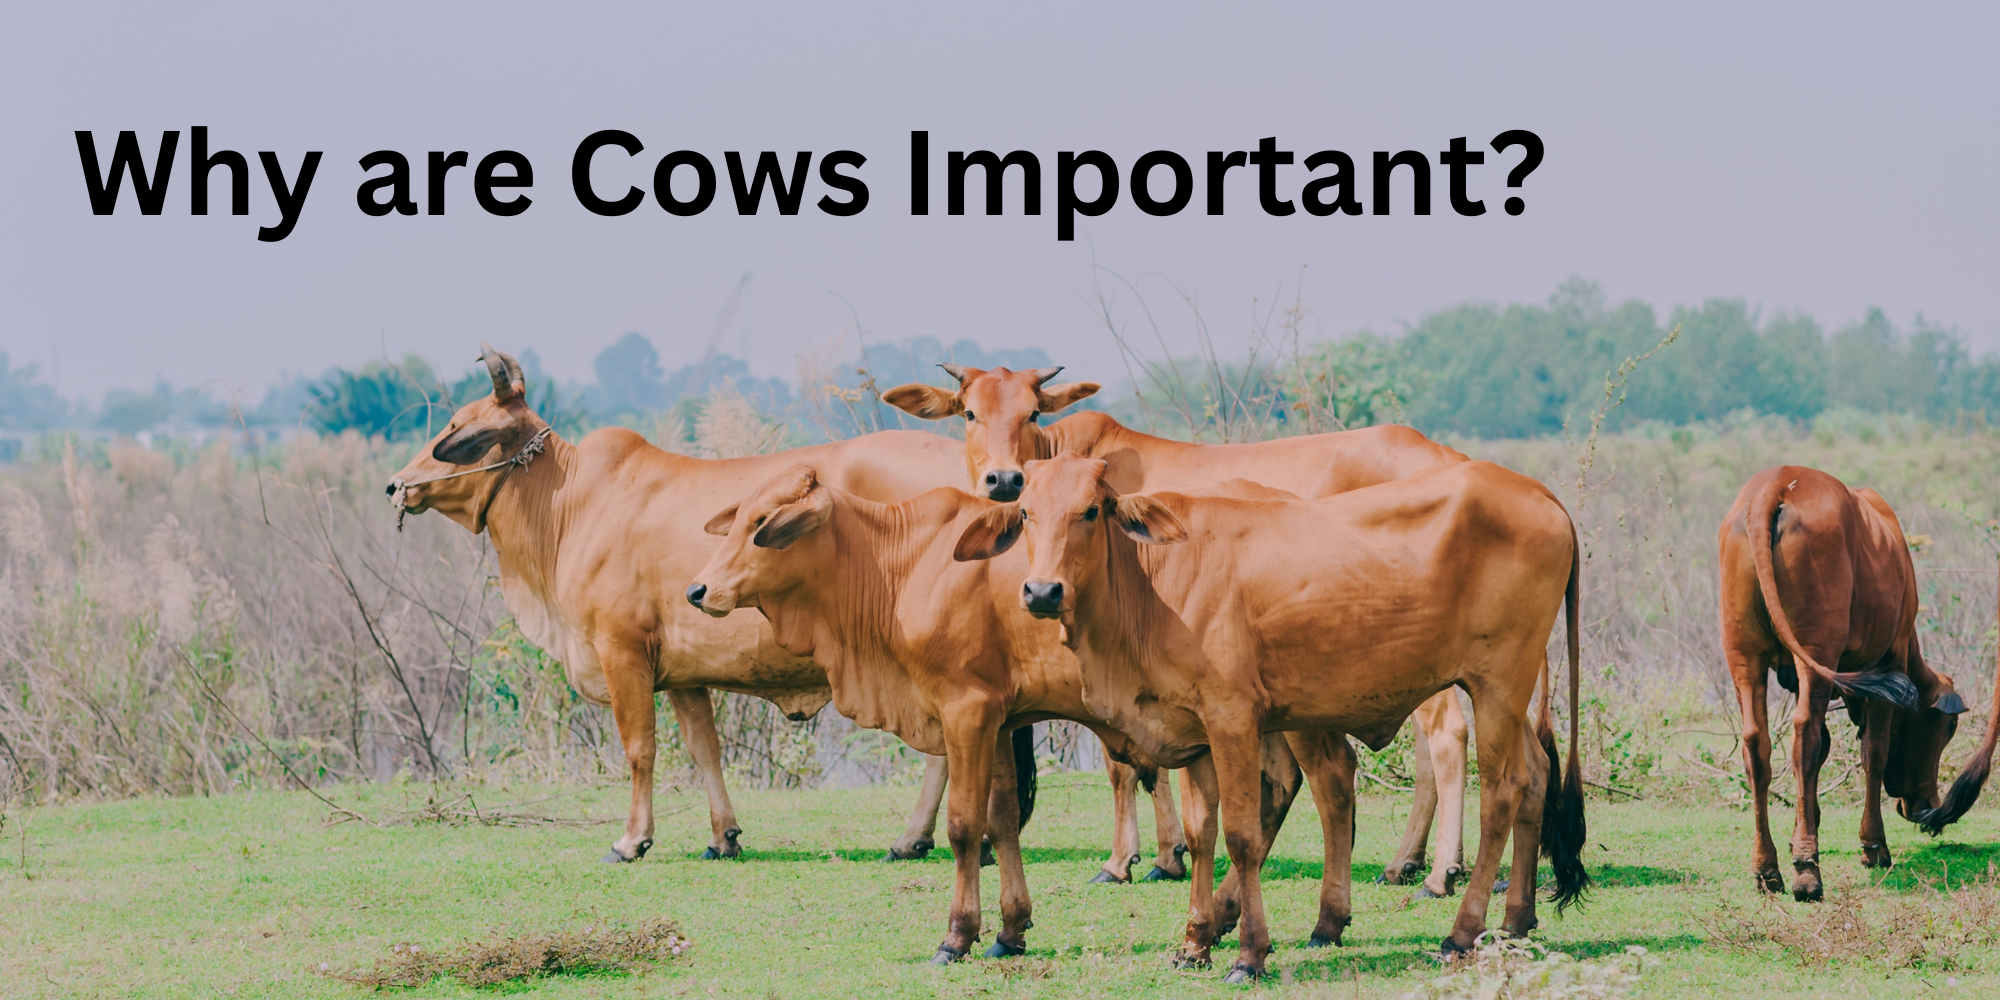 Why are cows important